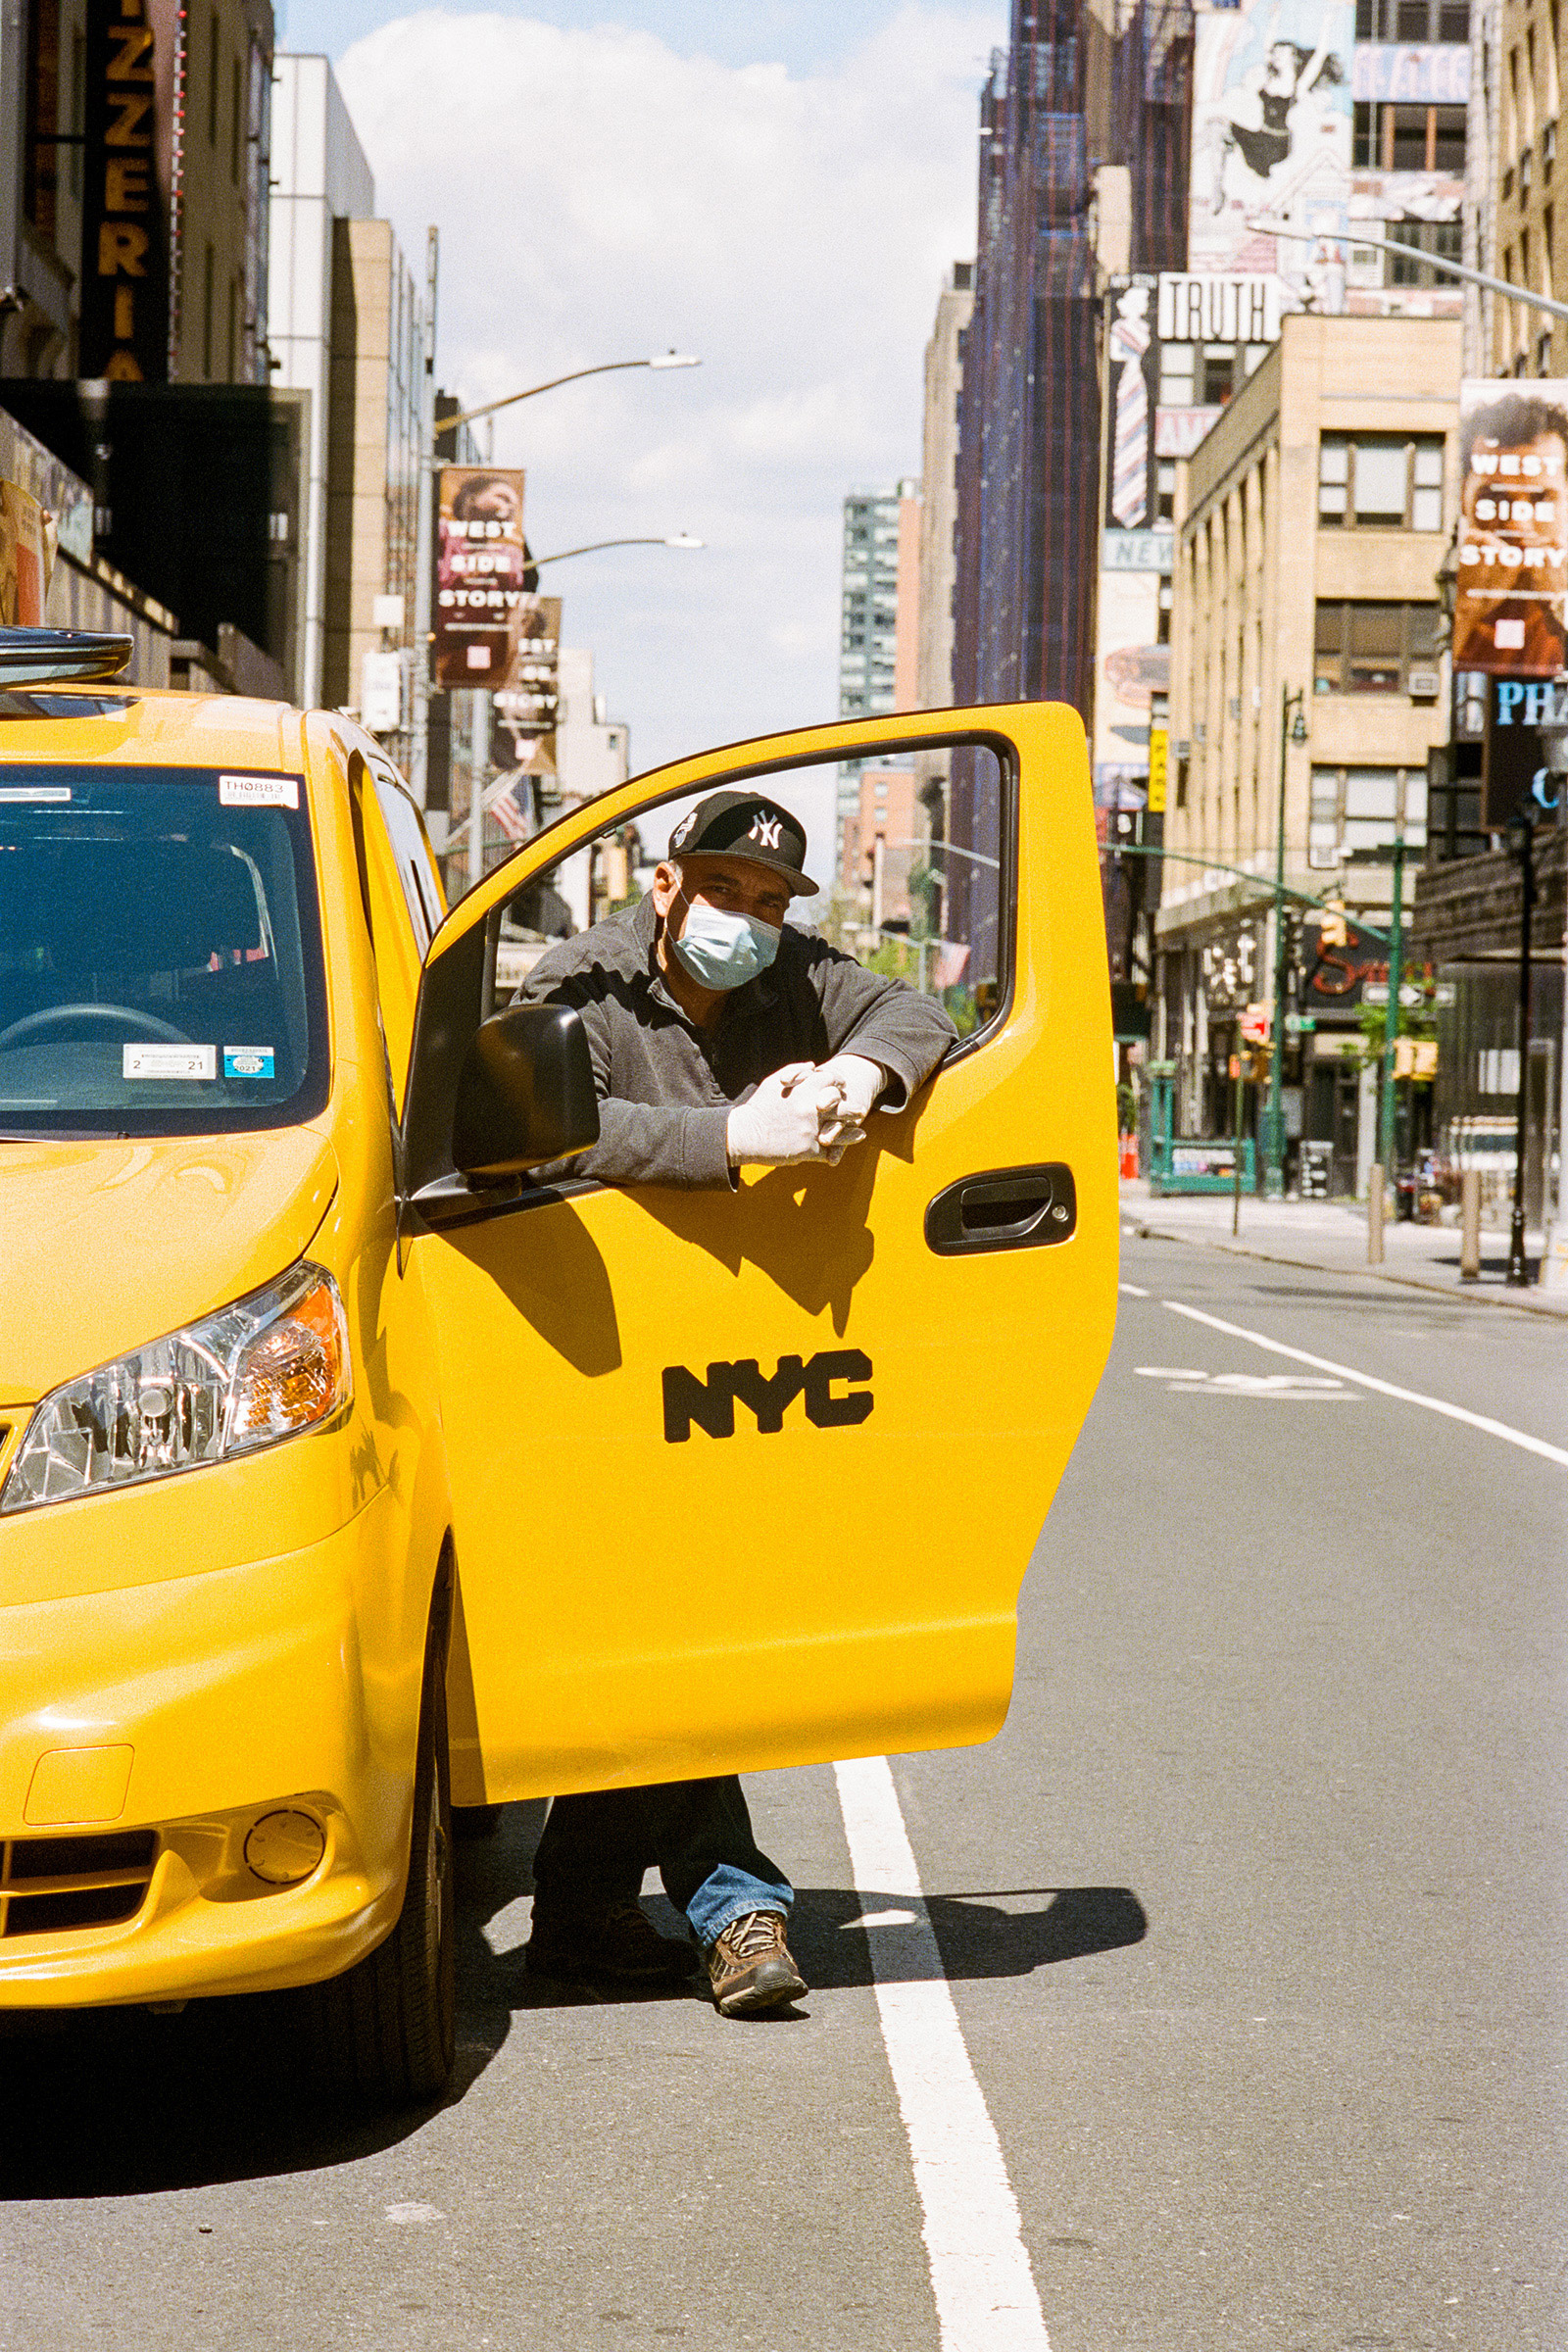 <strong>Mohamed Eleissawy</strong>, 63, Manhattan. "<a href="https://time.com/5836223/nyc-taxi-drivers-coronavirus/">New York City's Taxi Drivers Are in Peril as They Brave the Coronavirus and Uncertain Futures</a>," May 15. (Andre D. Wagner for TIME)